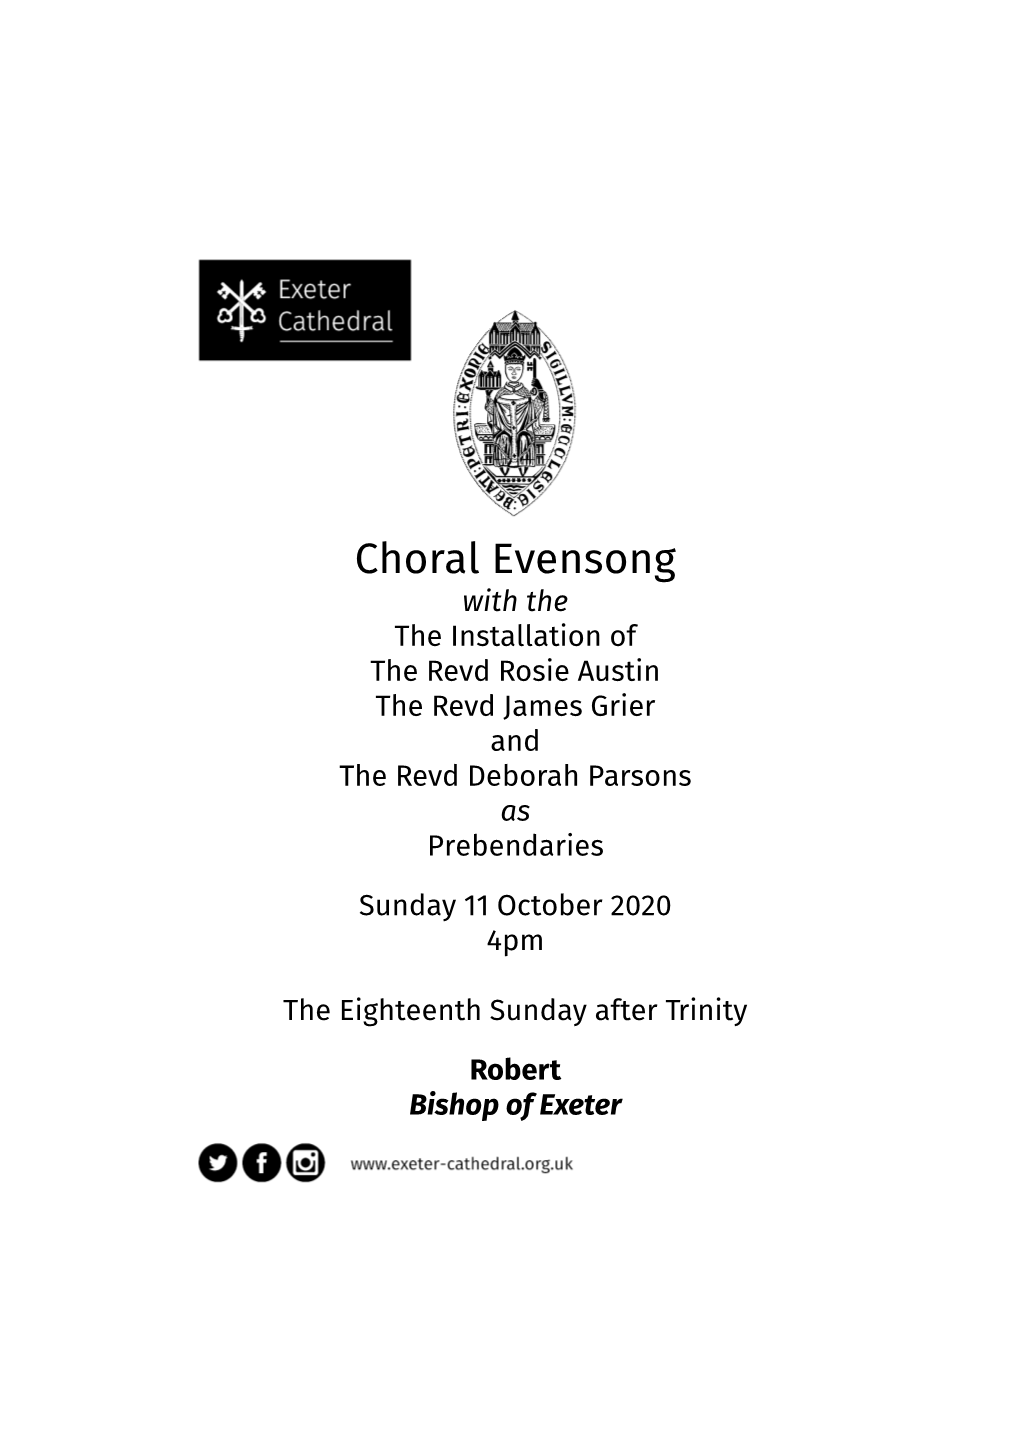 Choral Evensong with the the Installation of the Revd Rosie Austin the Revd James Grier and the Revd Deborah Parsons As Prebendaries